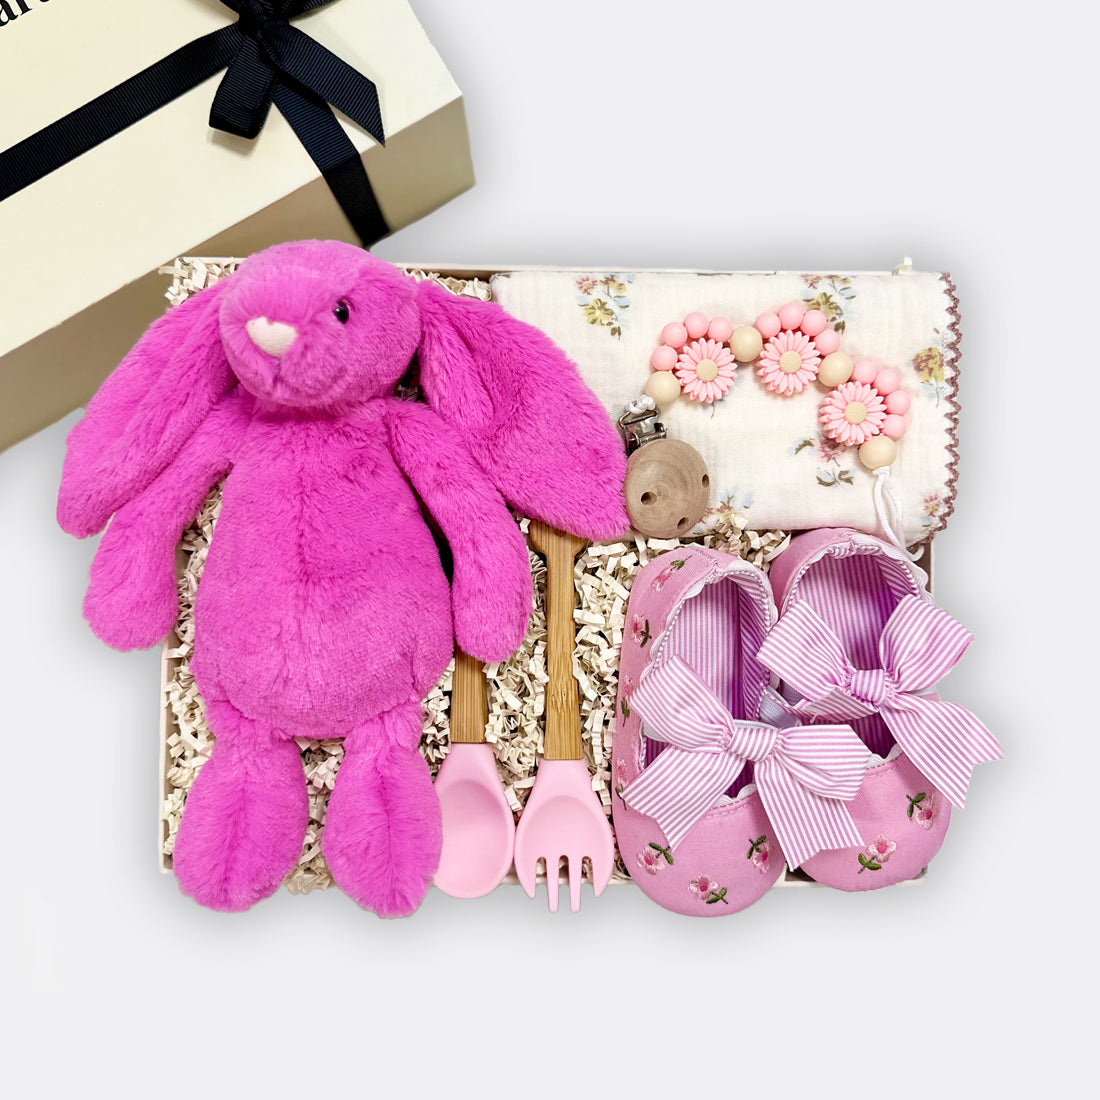 Bunny Soft Toy Cottage Chic Muslin Pacifier Clip Baby Fork Spoon Set Pink Teddy Bow Shoes, shop the best gift gifts for her for him from Inna carton online store dubai, UAE!